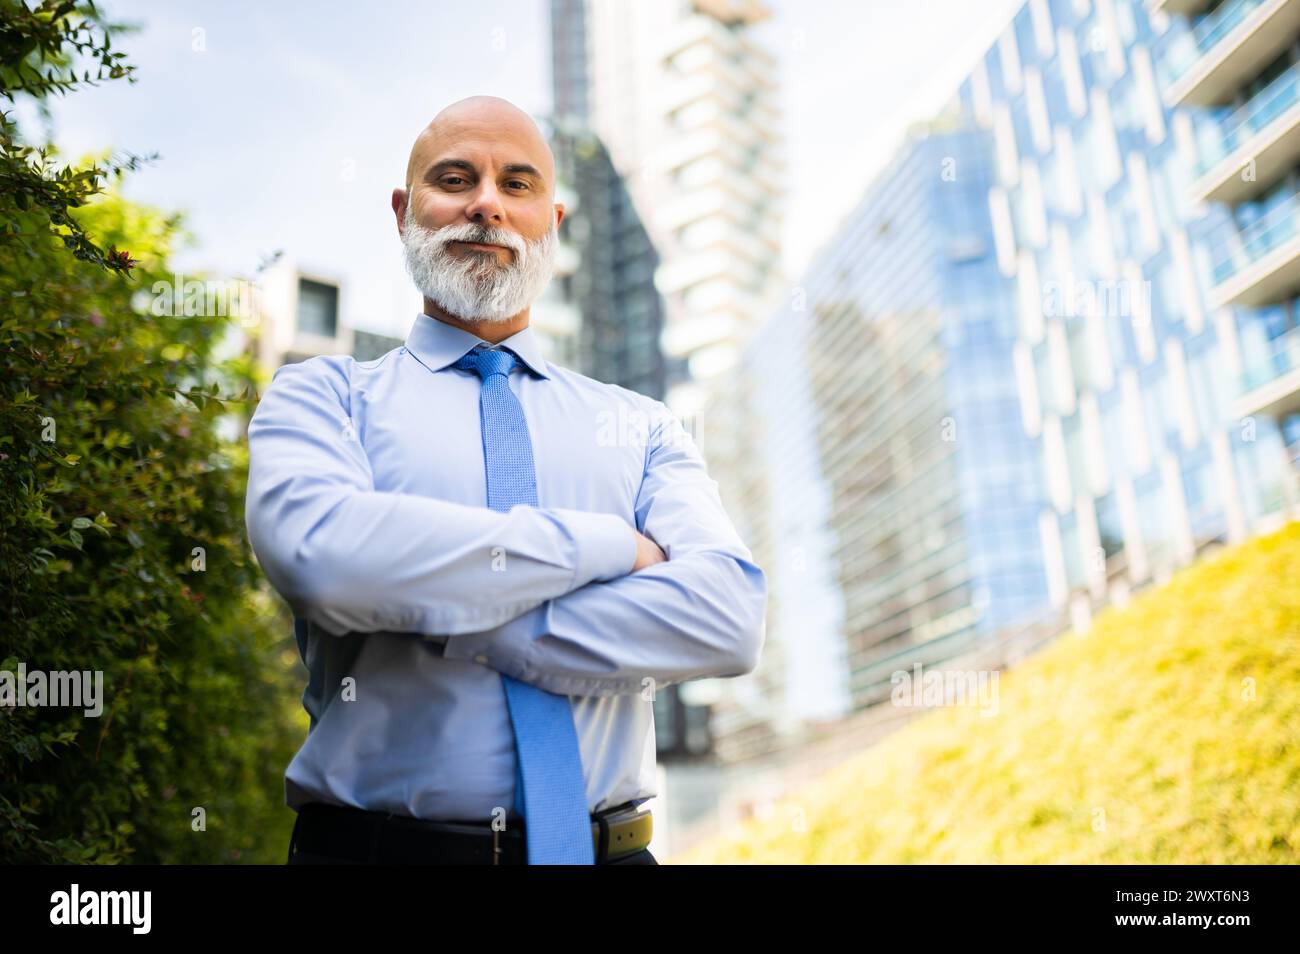 Mature bald stylish business man portrait with a white beard outdoor with folded arms Stock Photo